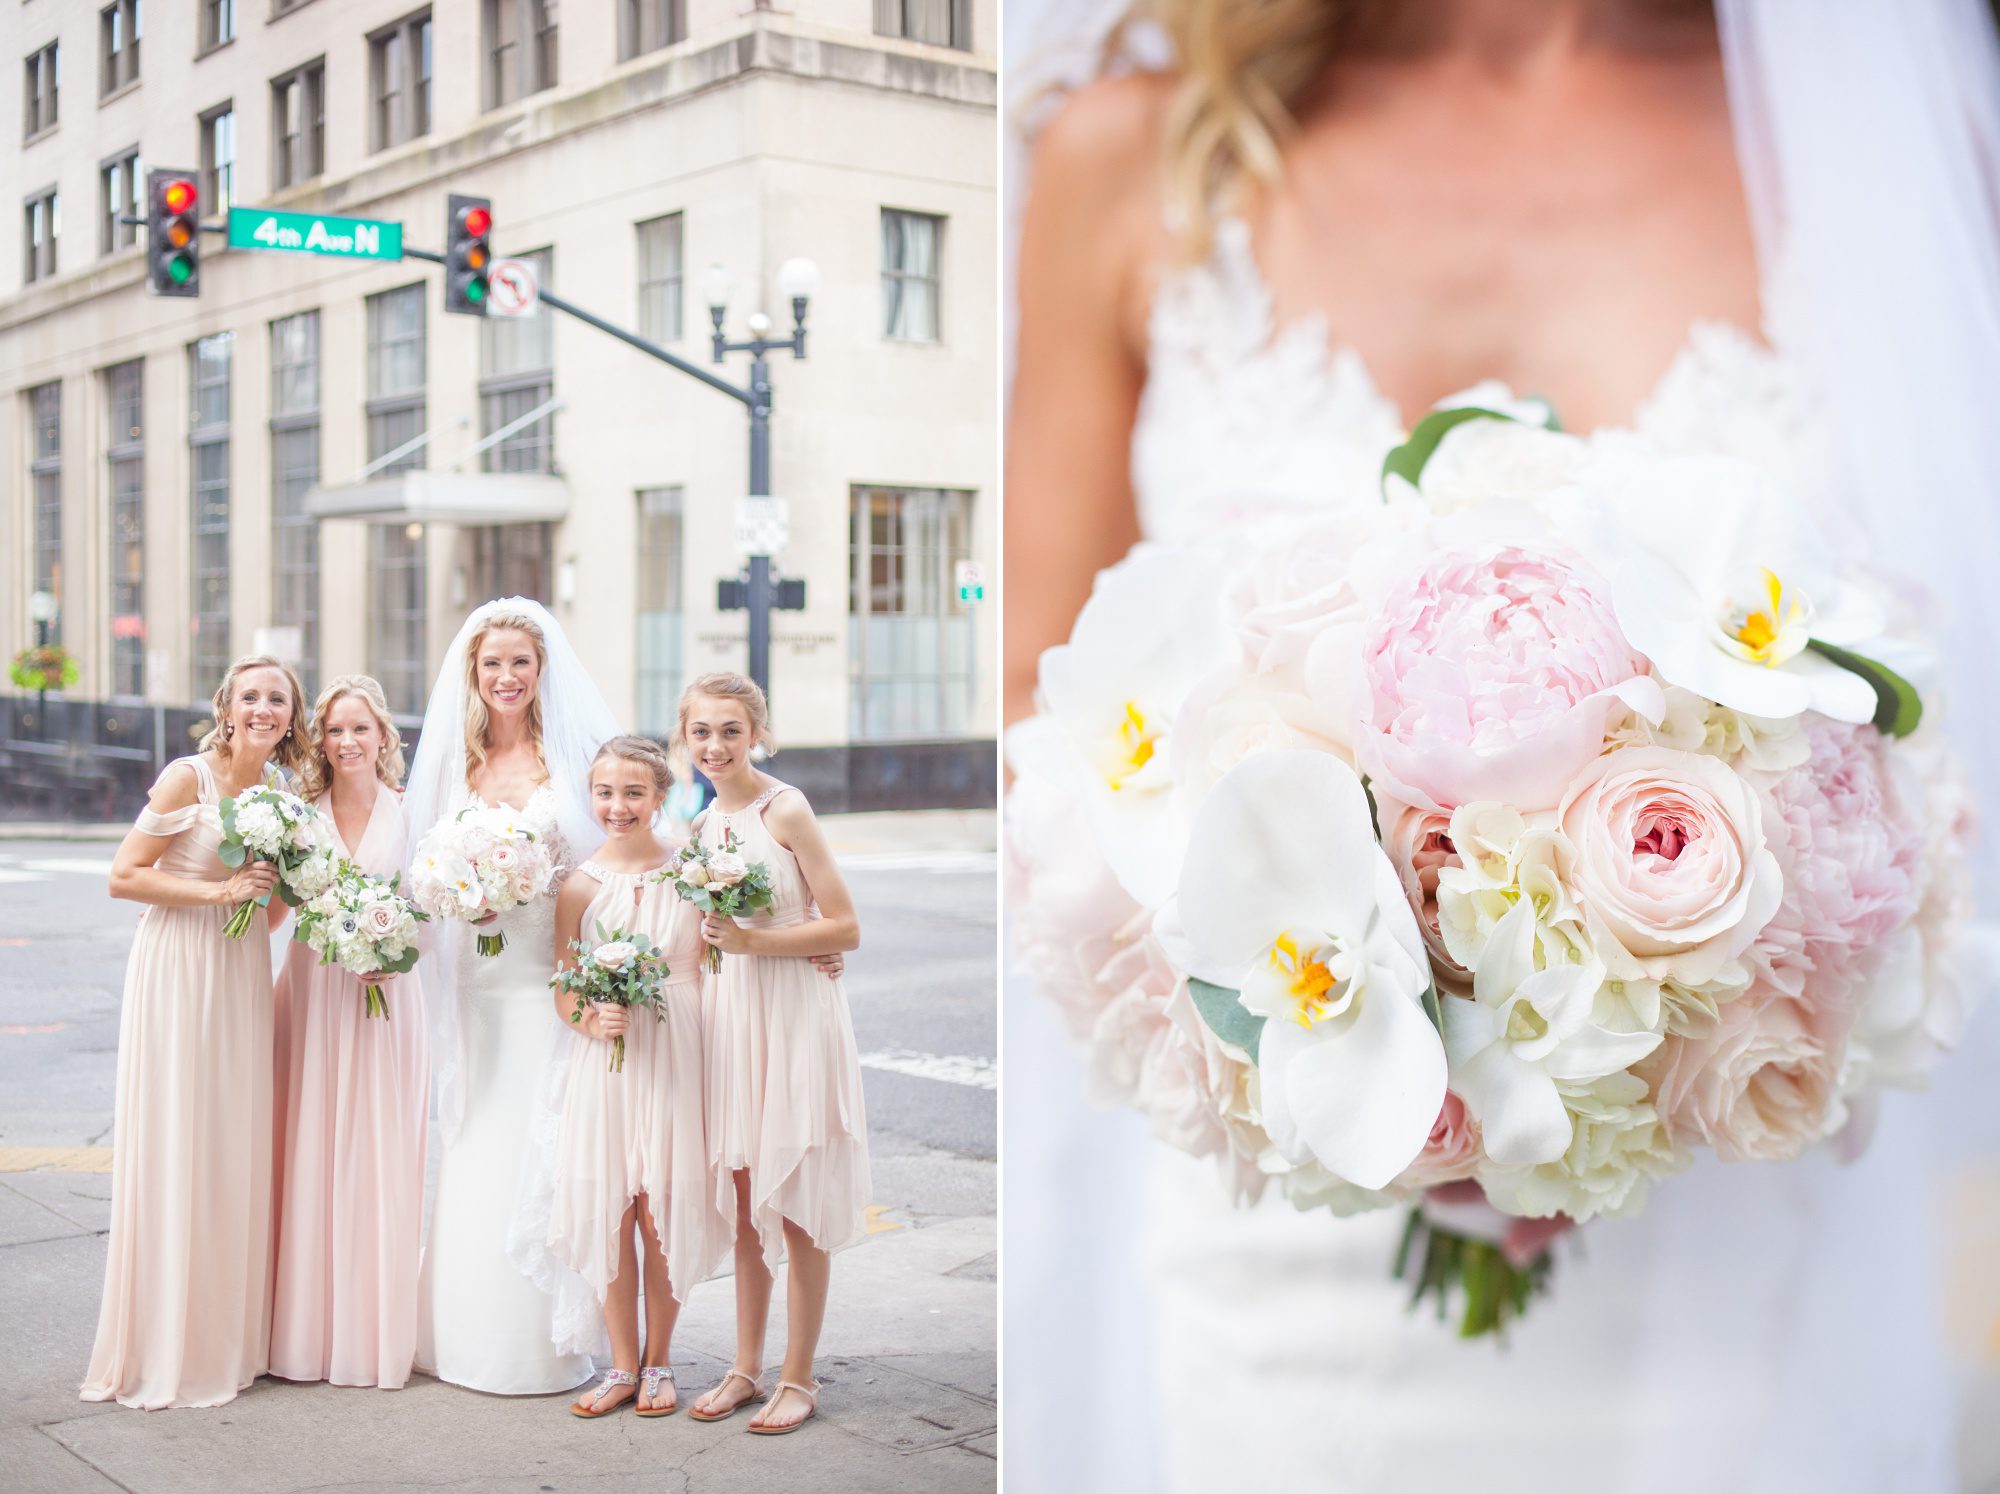 Bride and bridesmaids plus bridal bouquet at Courtyard Marriott Downtown Nashville before wedding ceremony and reception at City Club Nashville. Photos by Krista Lee Photography. 